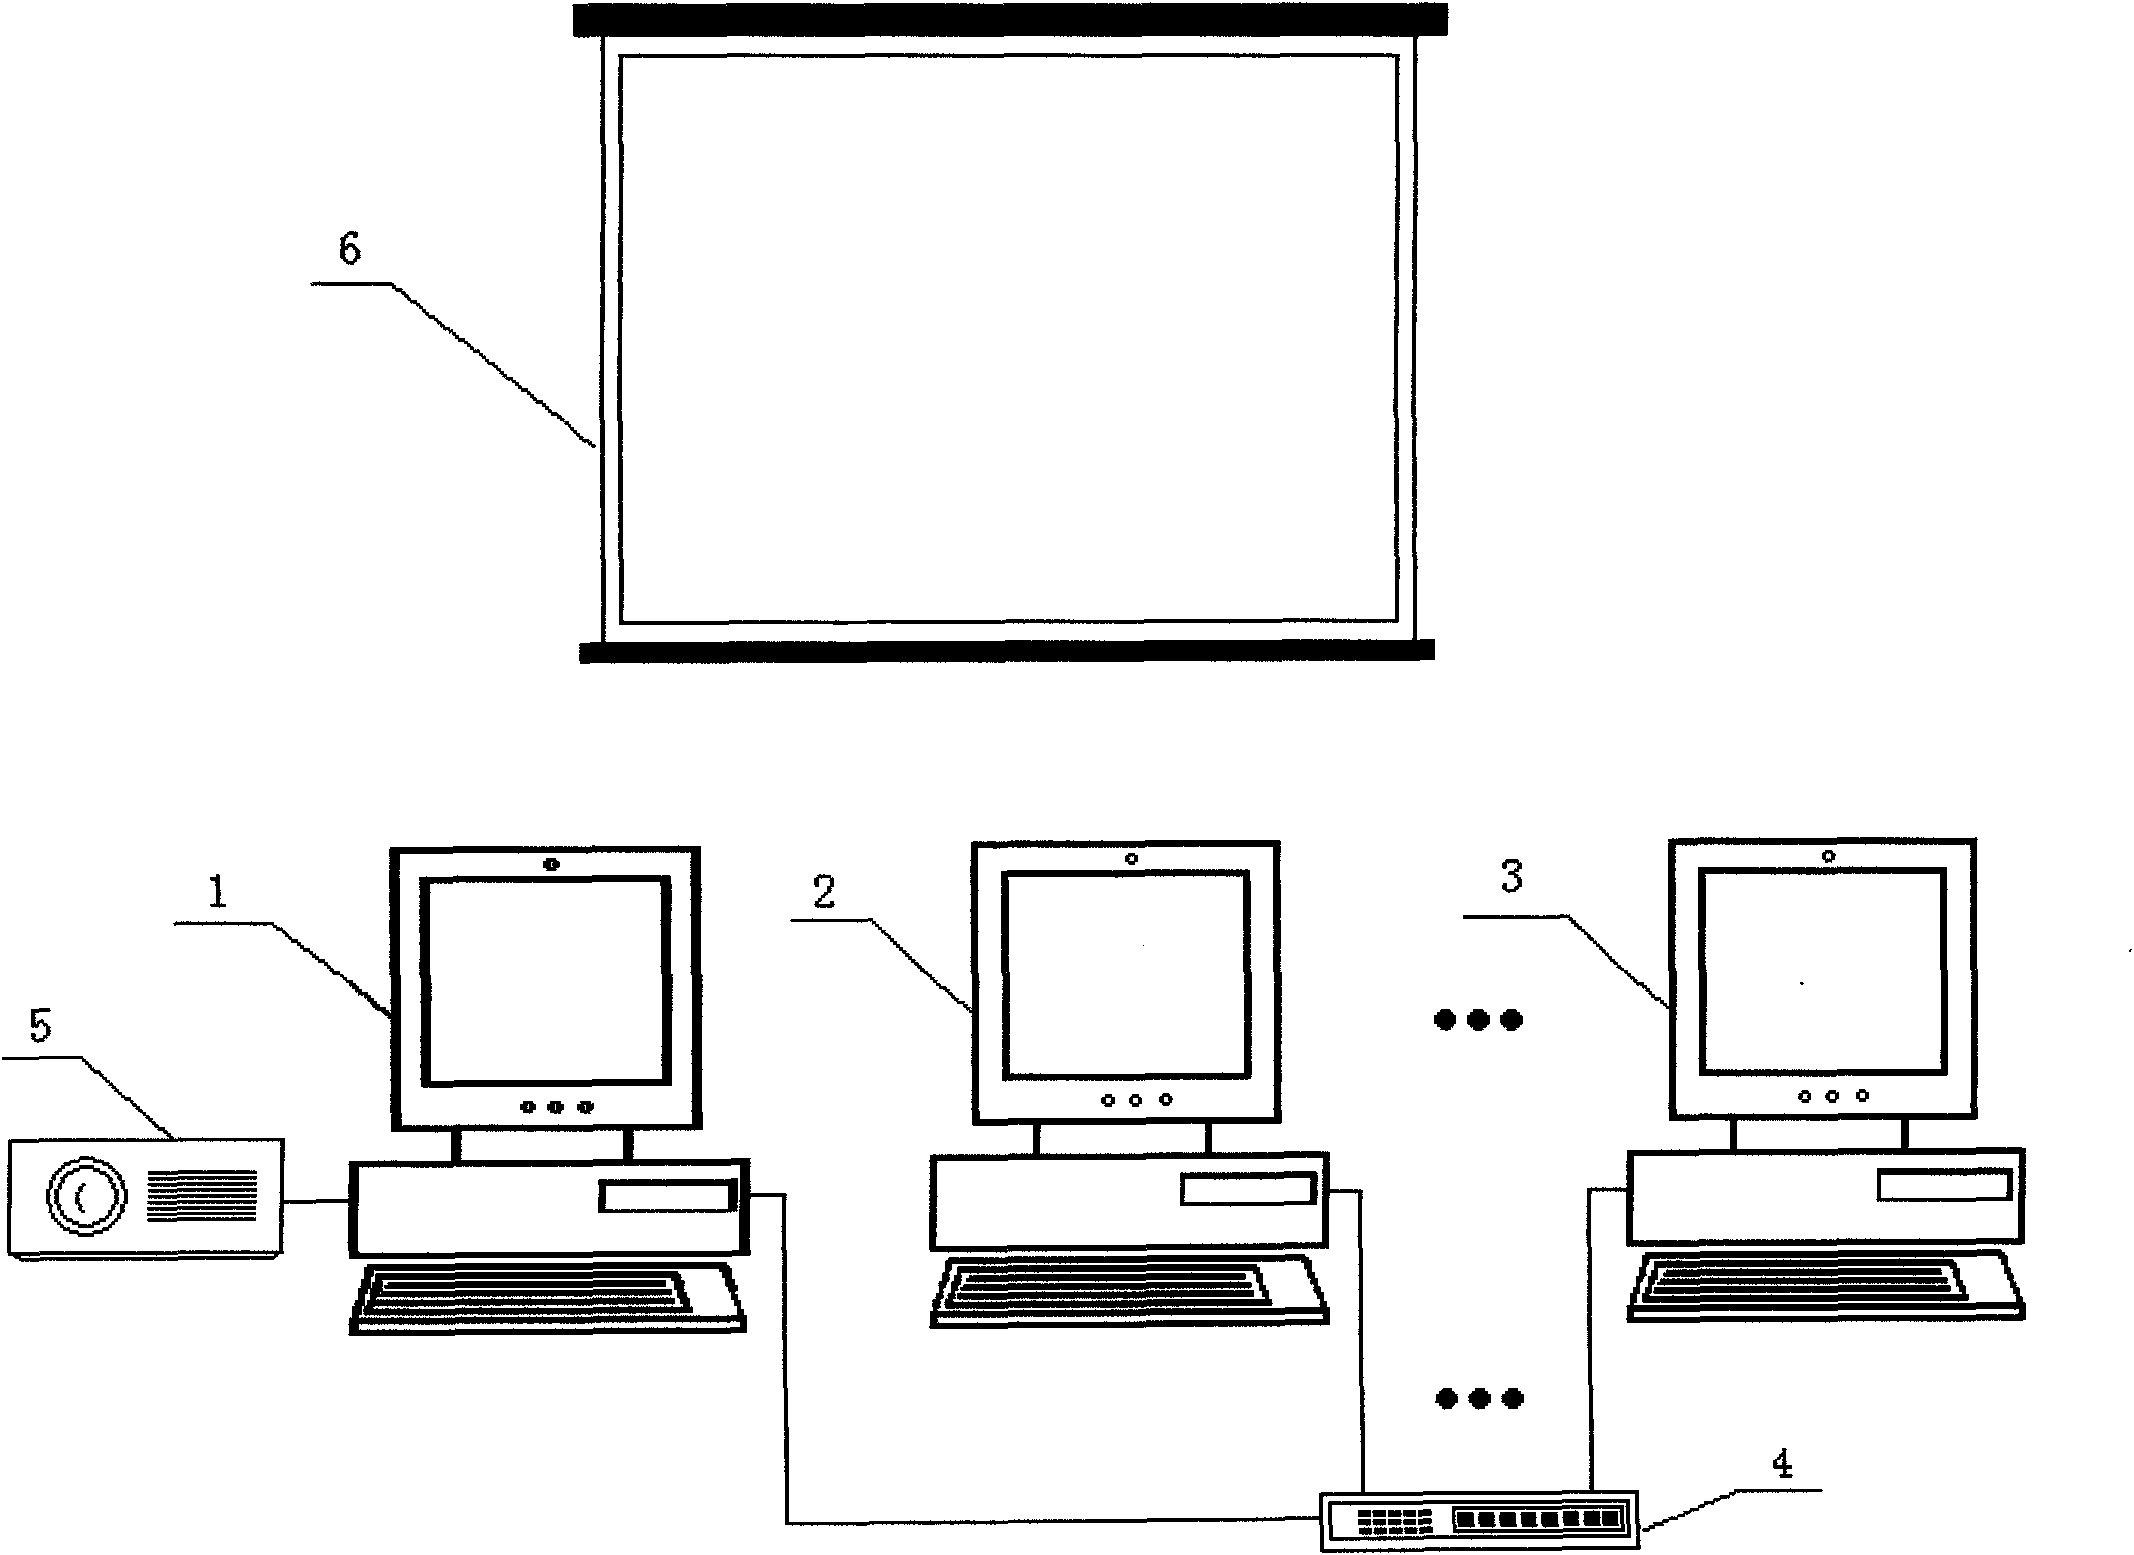 Student computer-on situation motoring system and monitoring method